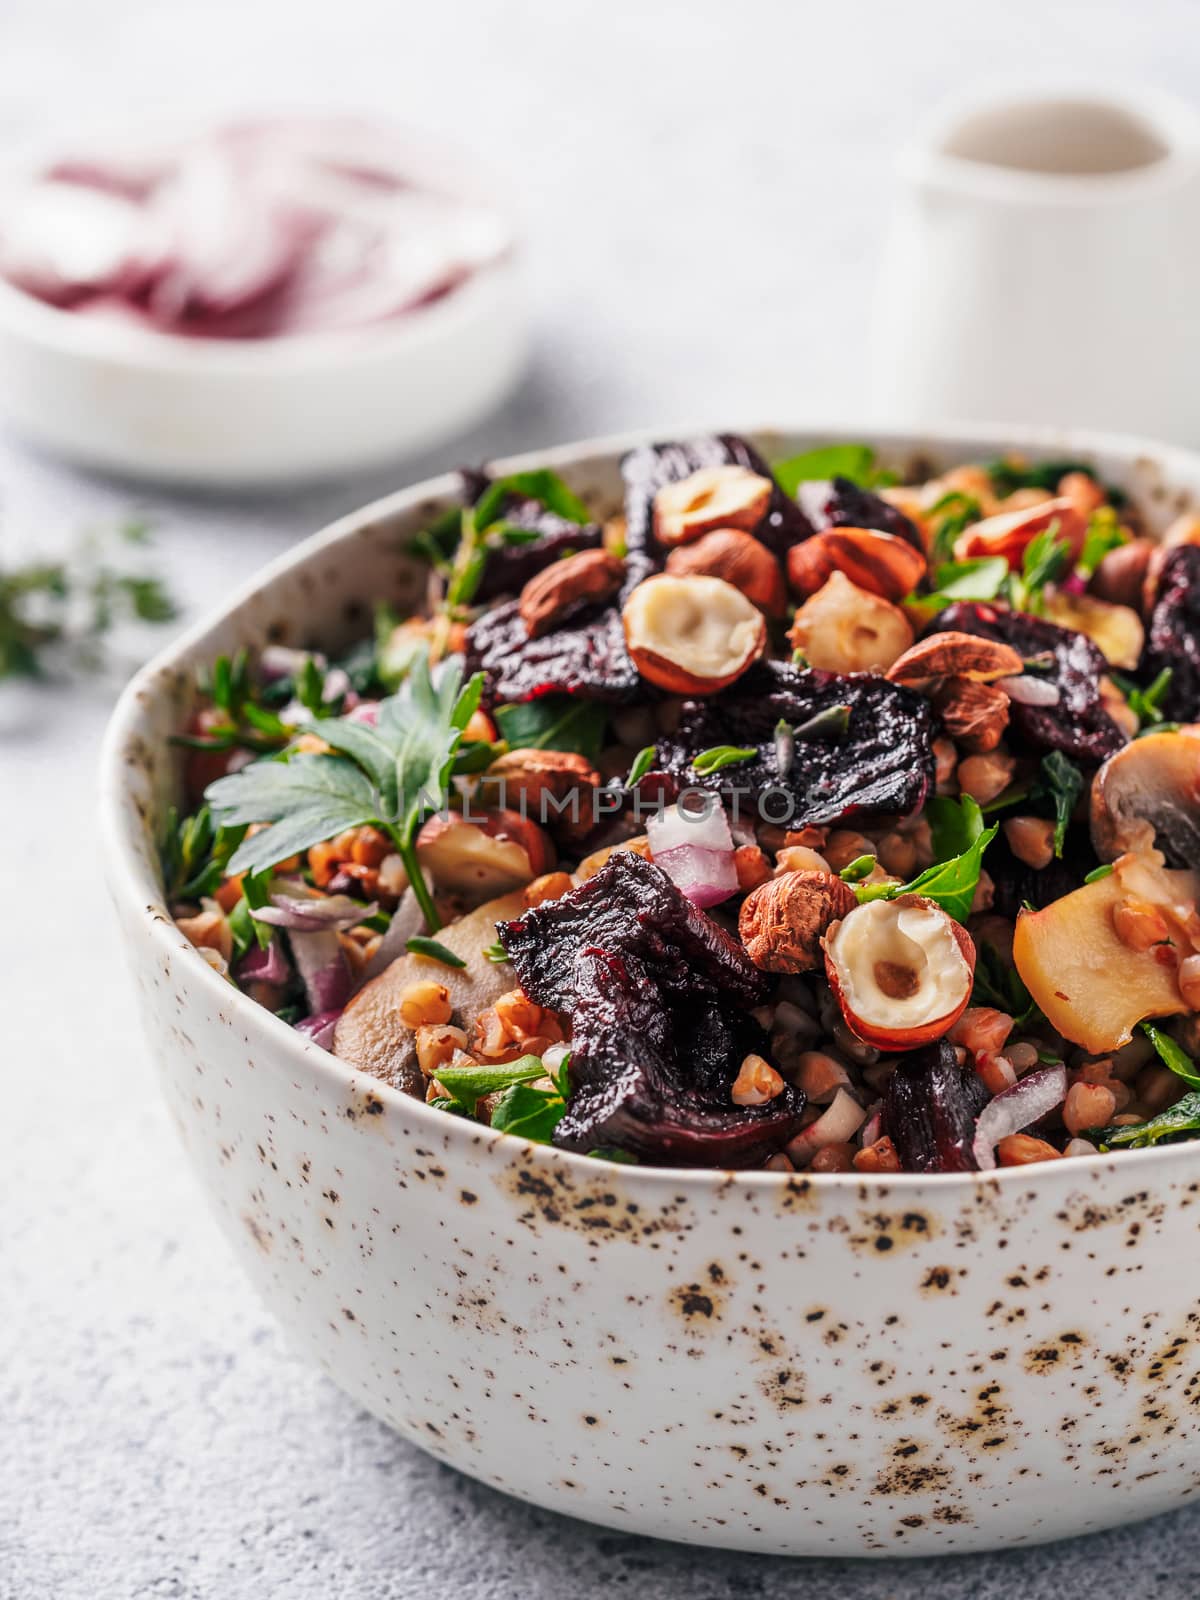 Warm buckwheat and beetroot salad on gray background. Vegetarian diet idea and recipe -salad with beetroot, buckwheat, mushrooms, onion, fresh herbs,hazelnut. Copy space for text